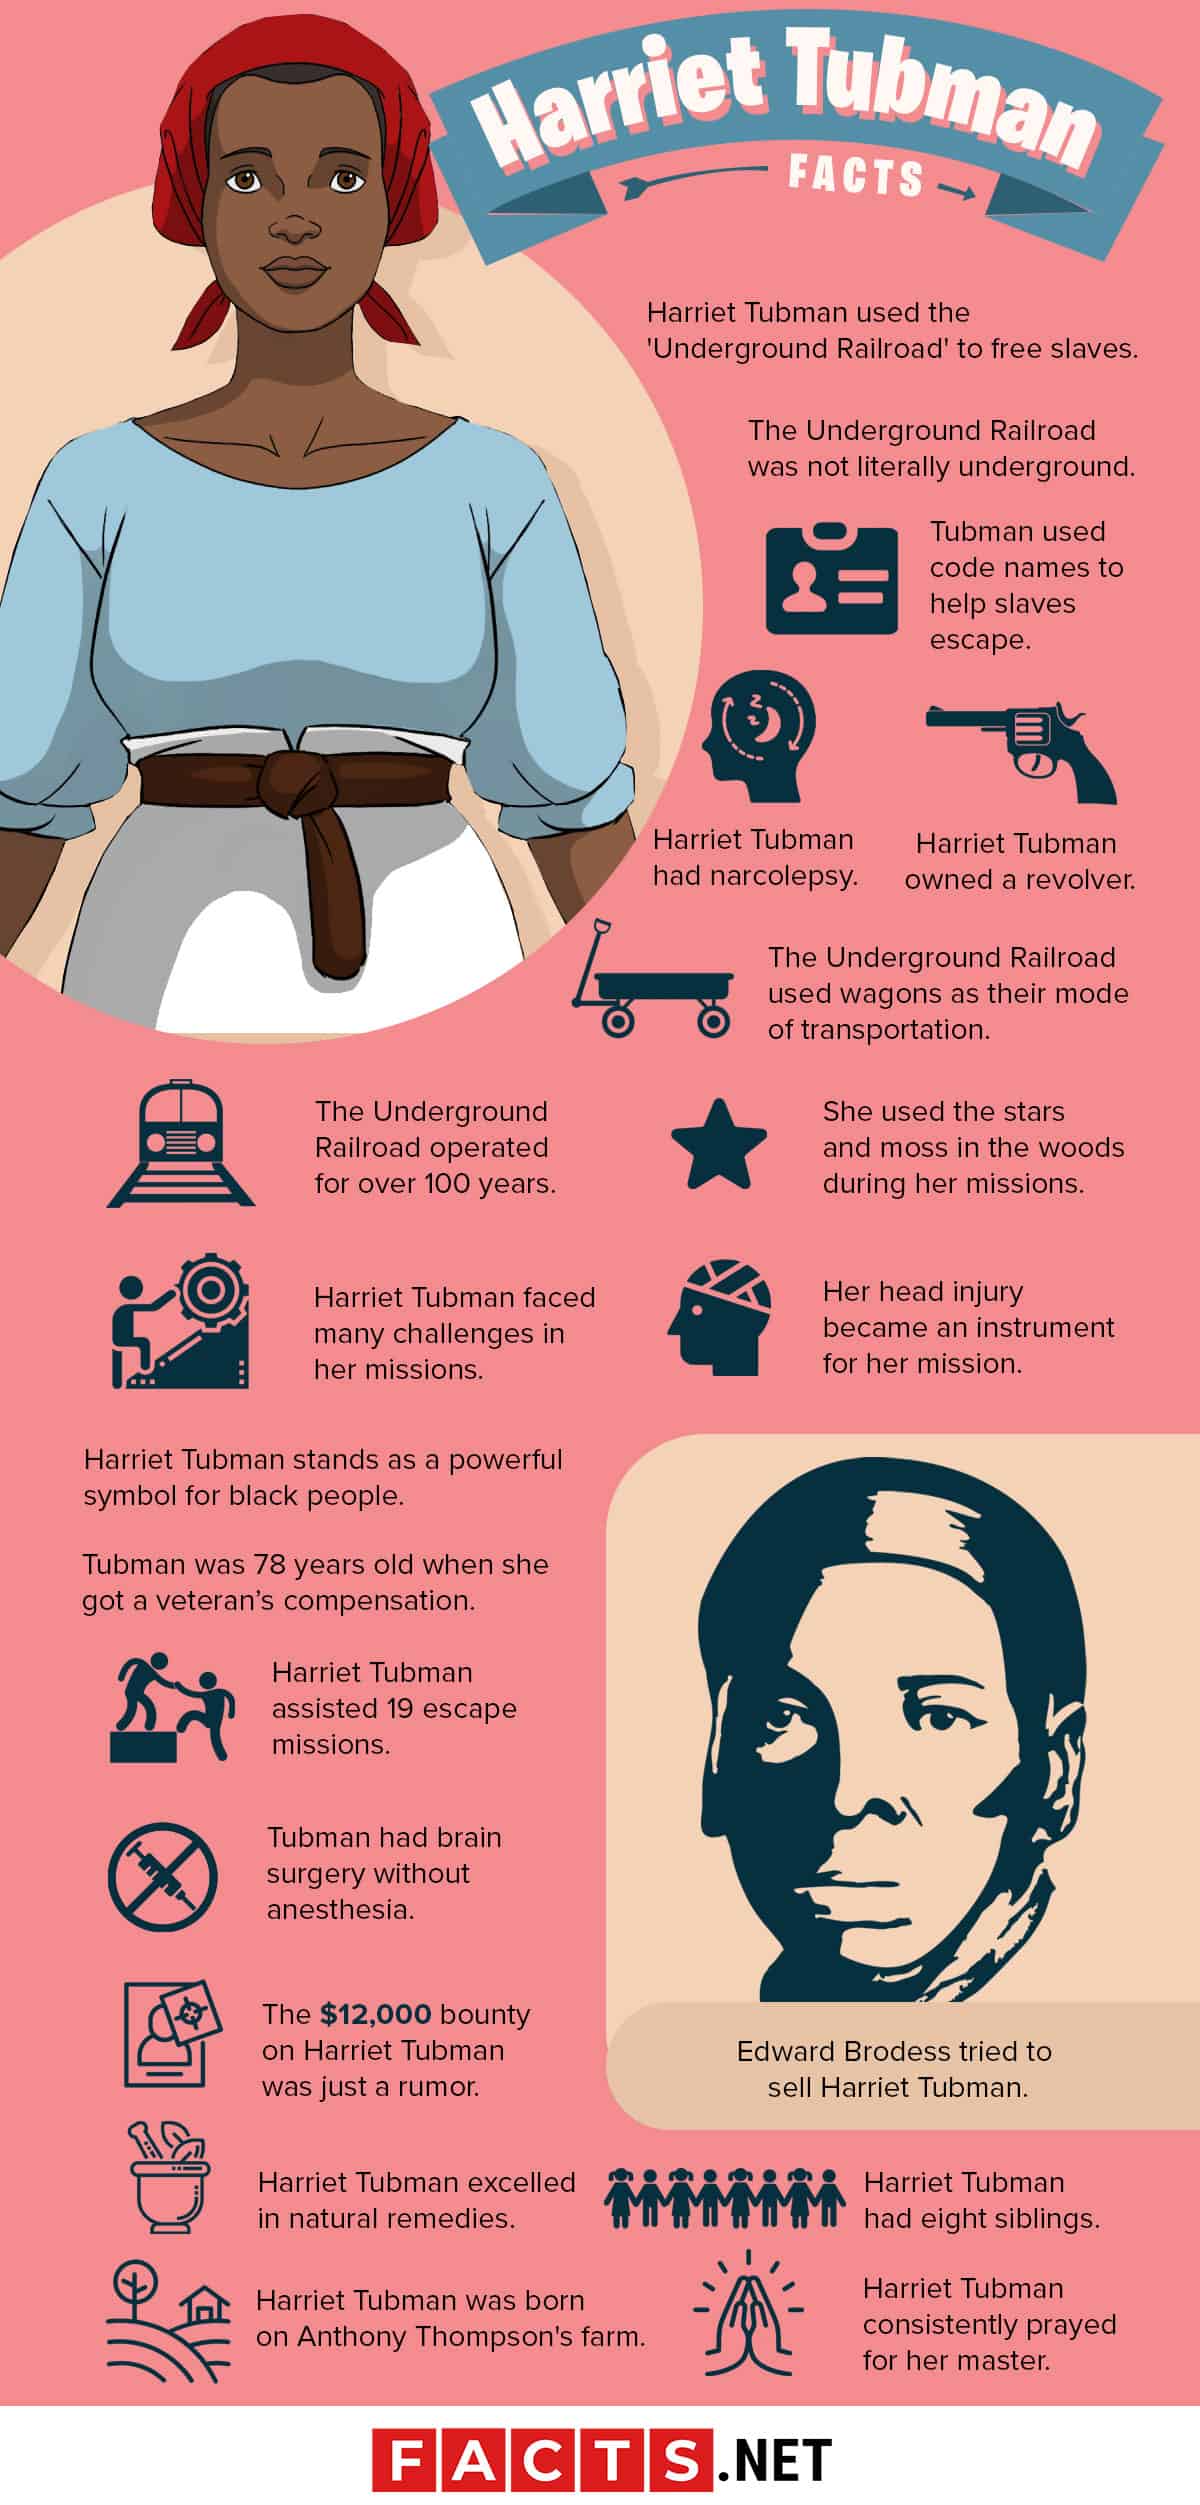 17 Things You Didn't Know About Harriet Tubman